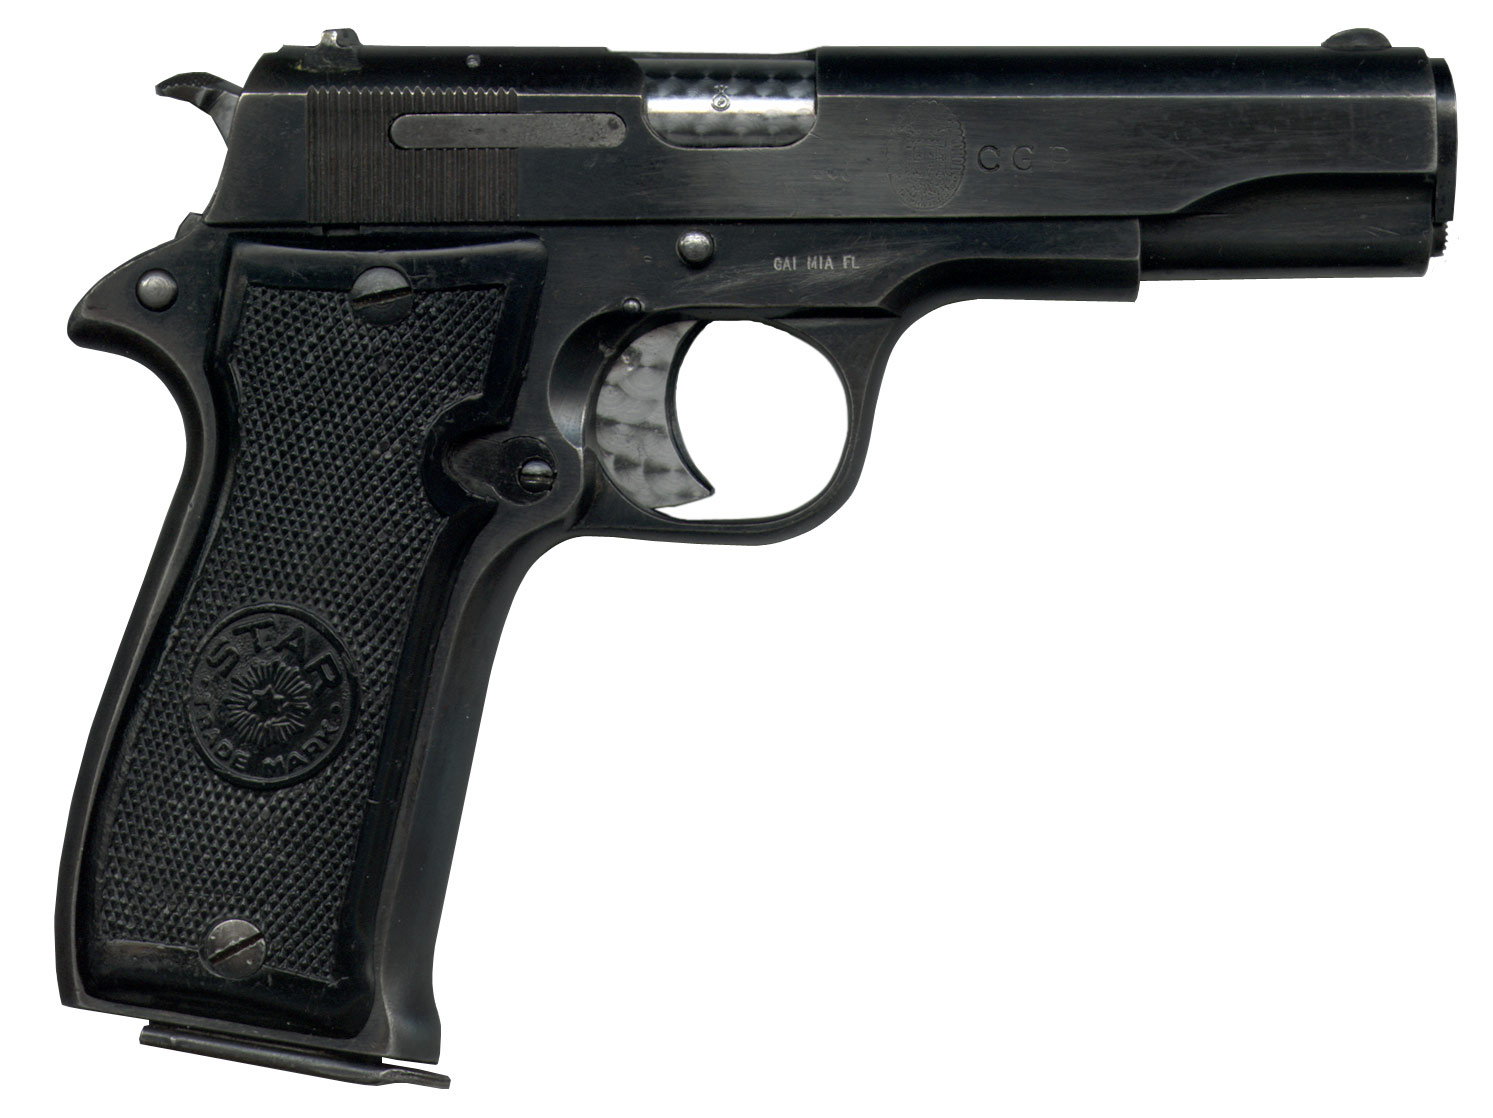 The S series are all similar, compact, all steel locked-breech pistols cham...